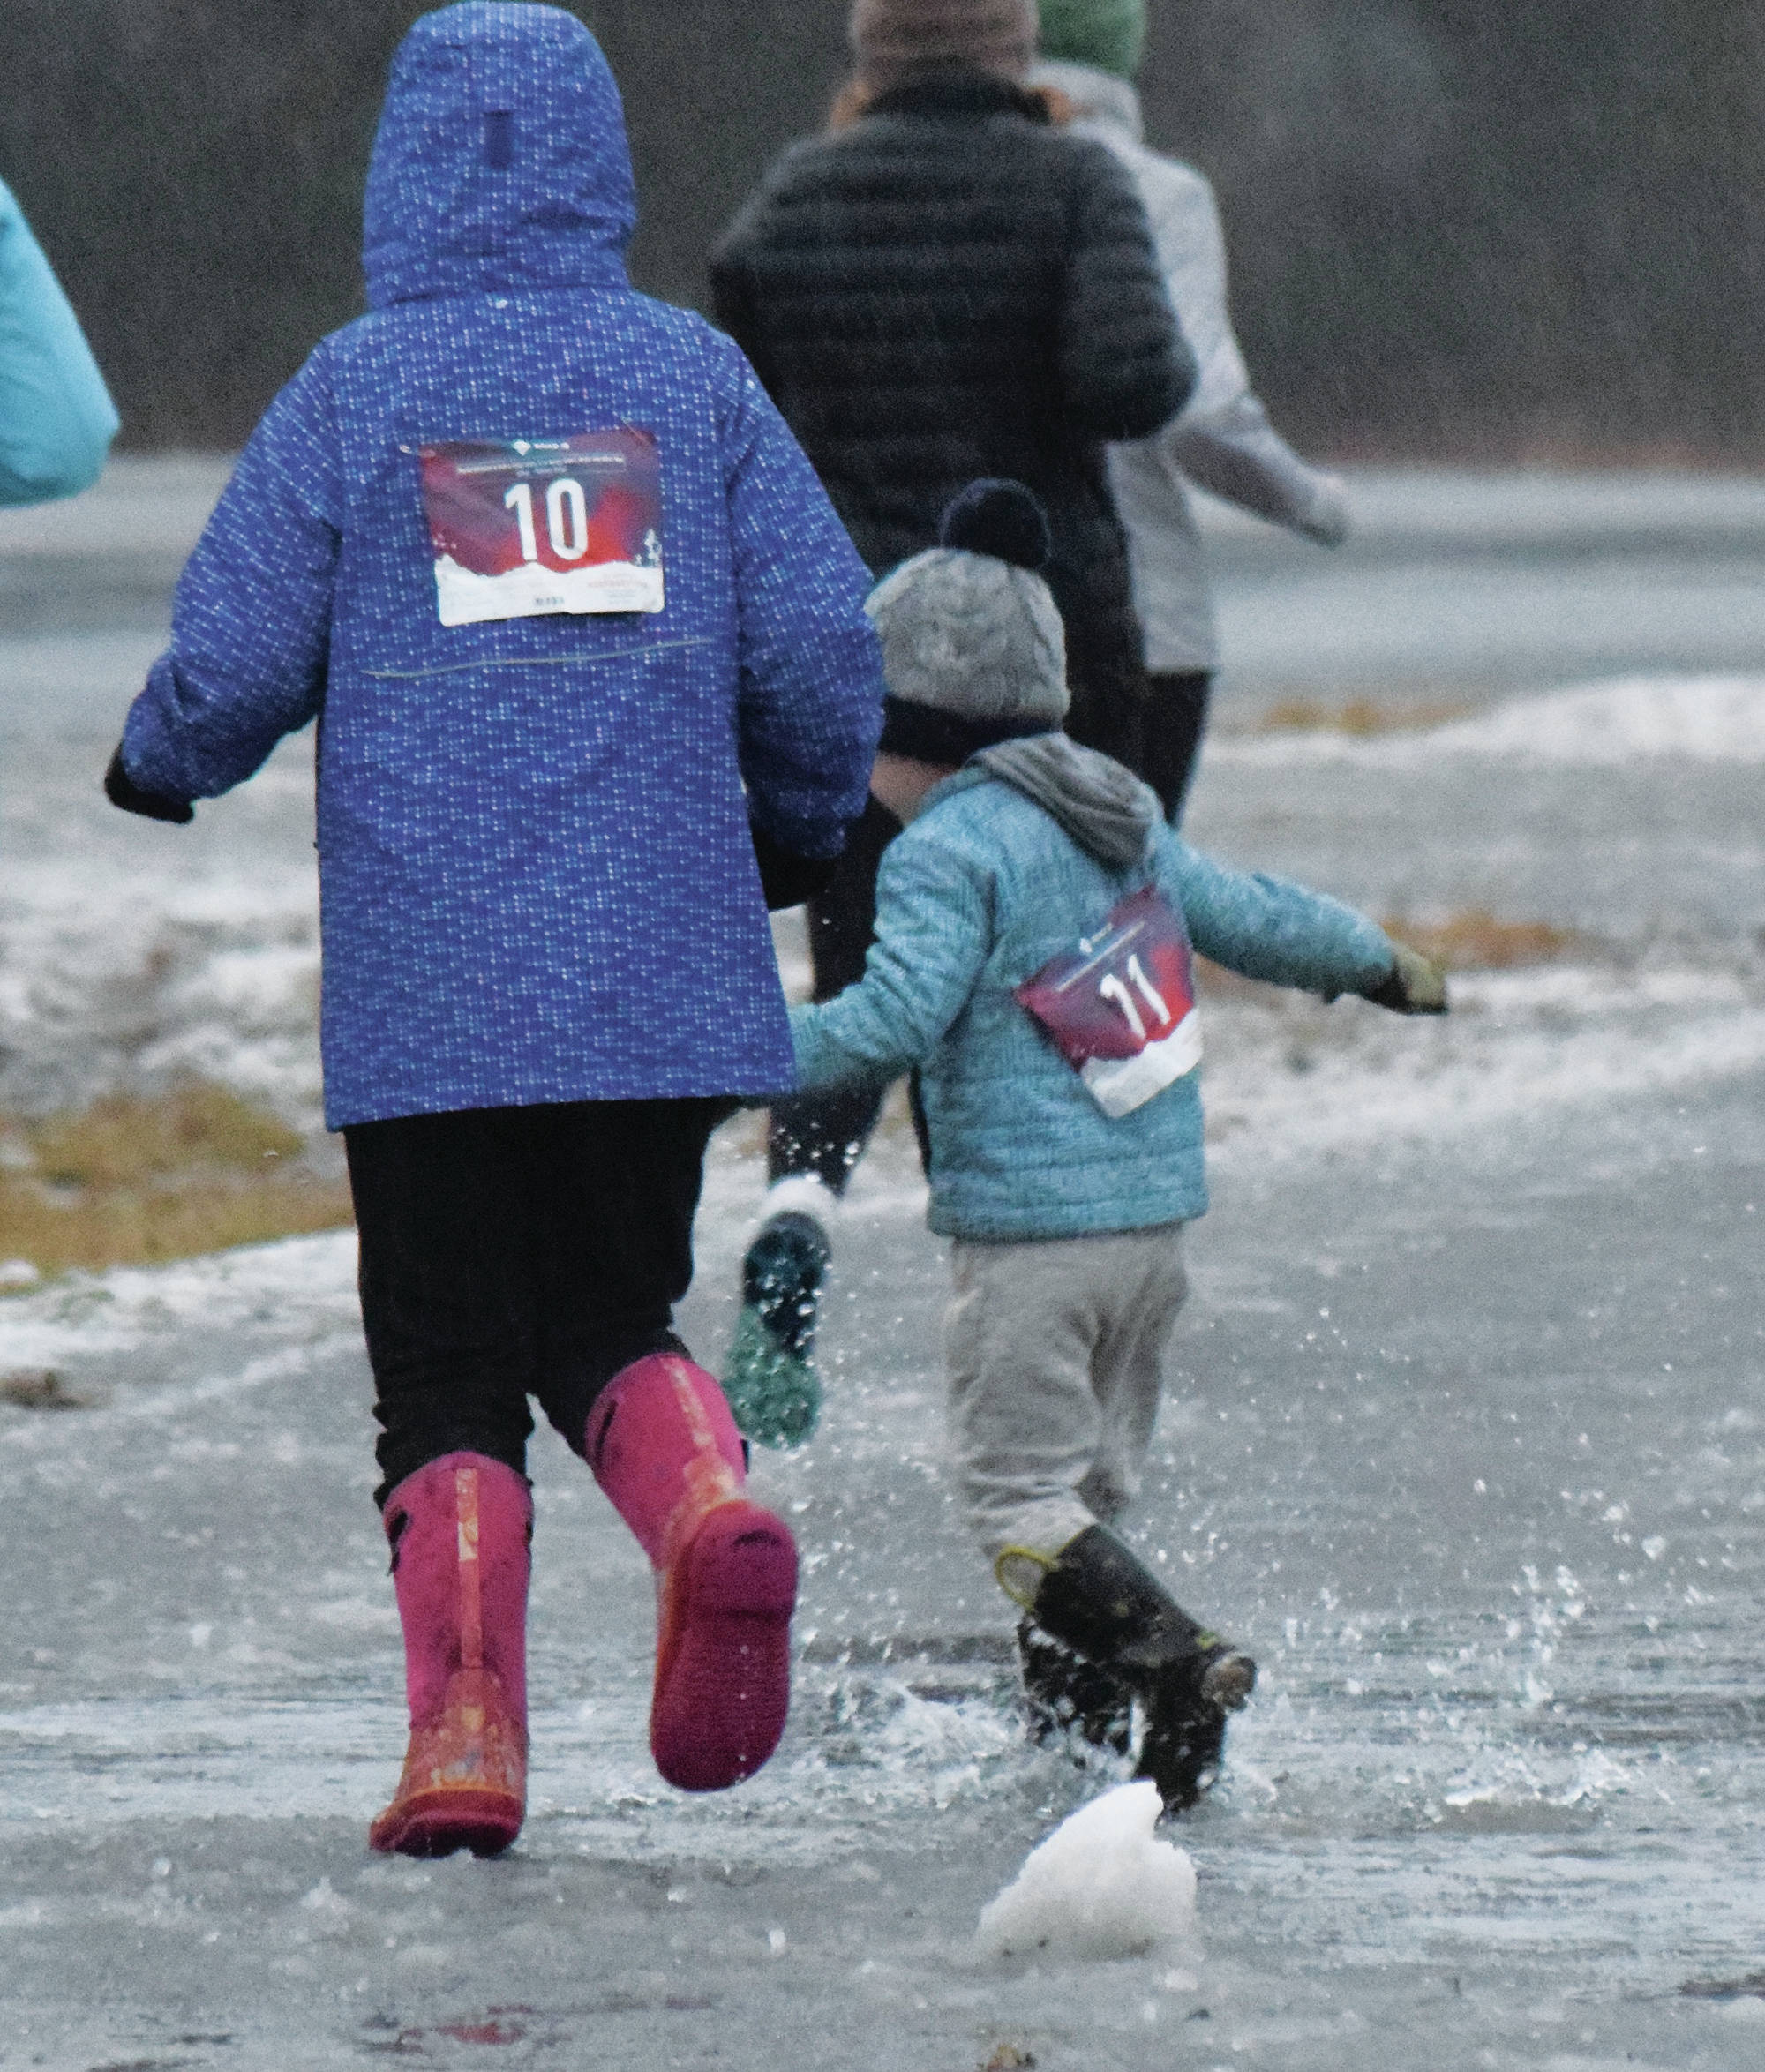 A youth runner splashes through a puddle early on Thursday, Nov. 28, 2019, at the Turkey Trot in Soldotna, Alaska. (Photo by Joey Klecka/Peninsula Clarion)